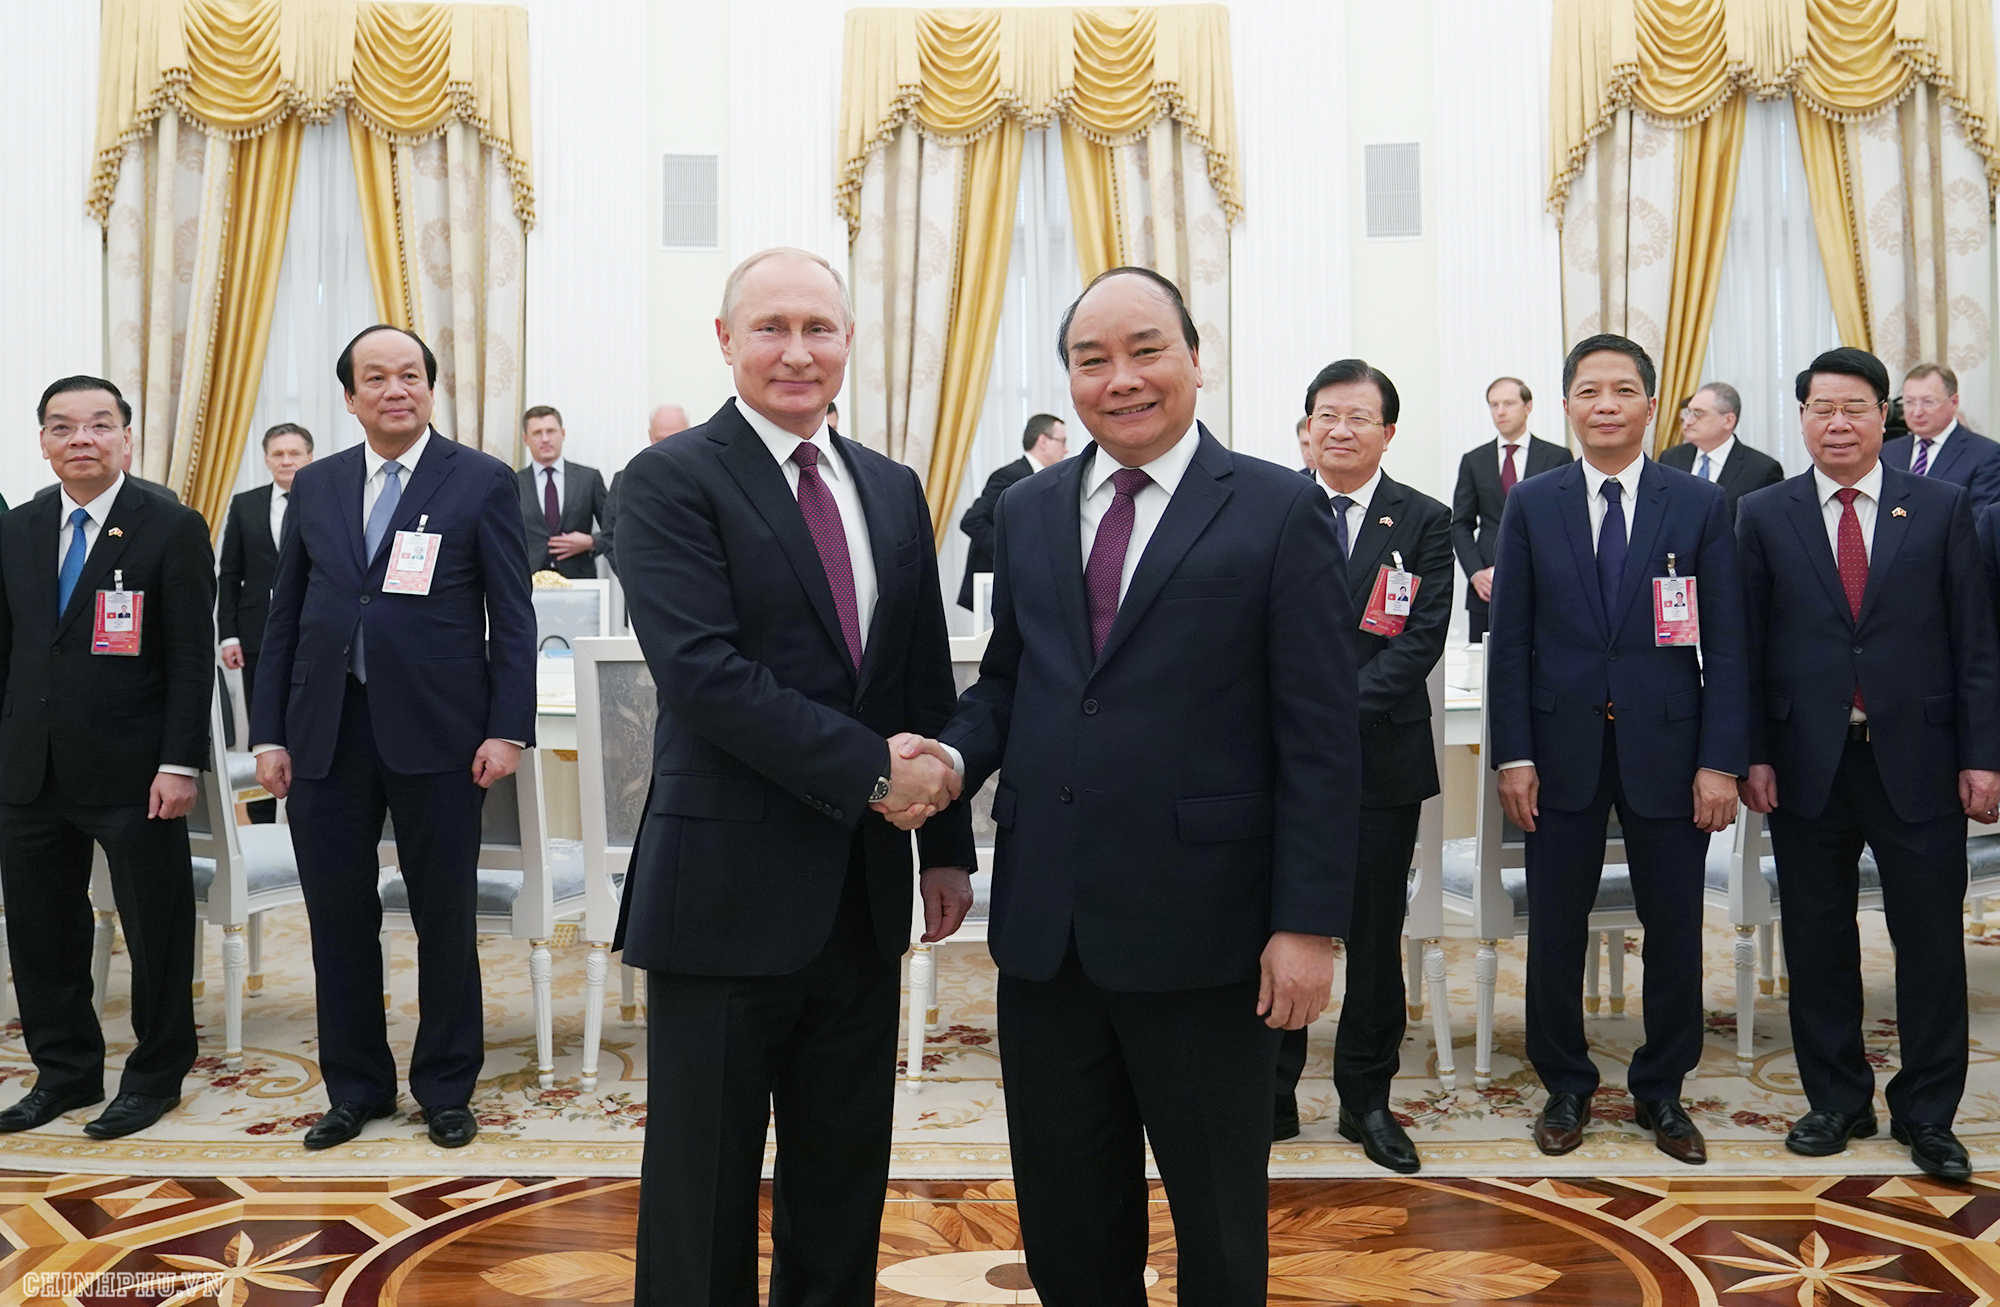 Prime Minister Nguyen Xuan Phuc shakes hands with President Vladimir Putin in Moscow on May 22, 2019. Photo: Vietnam Government Portal